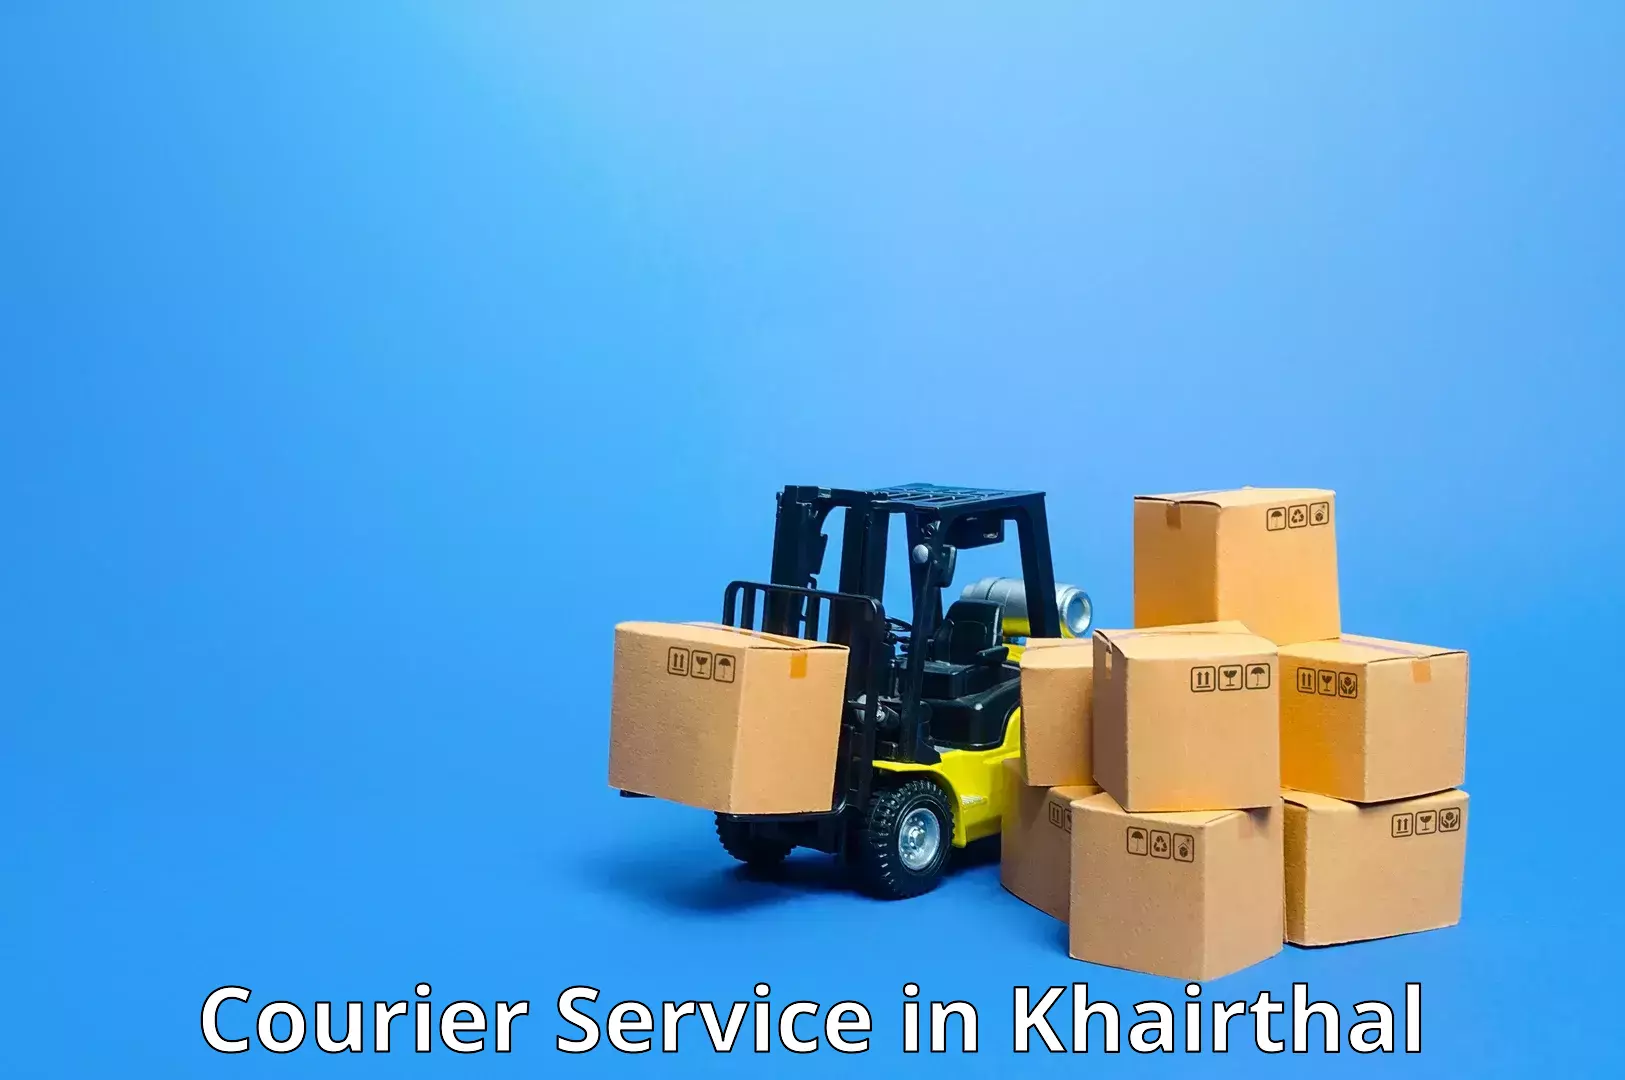 Optimized delivery routes in Khairthal